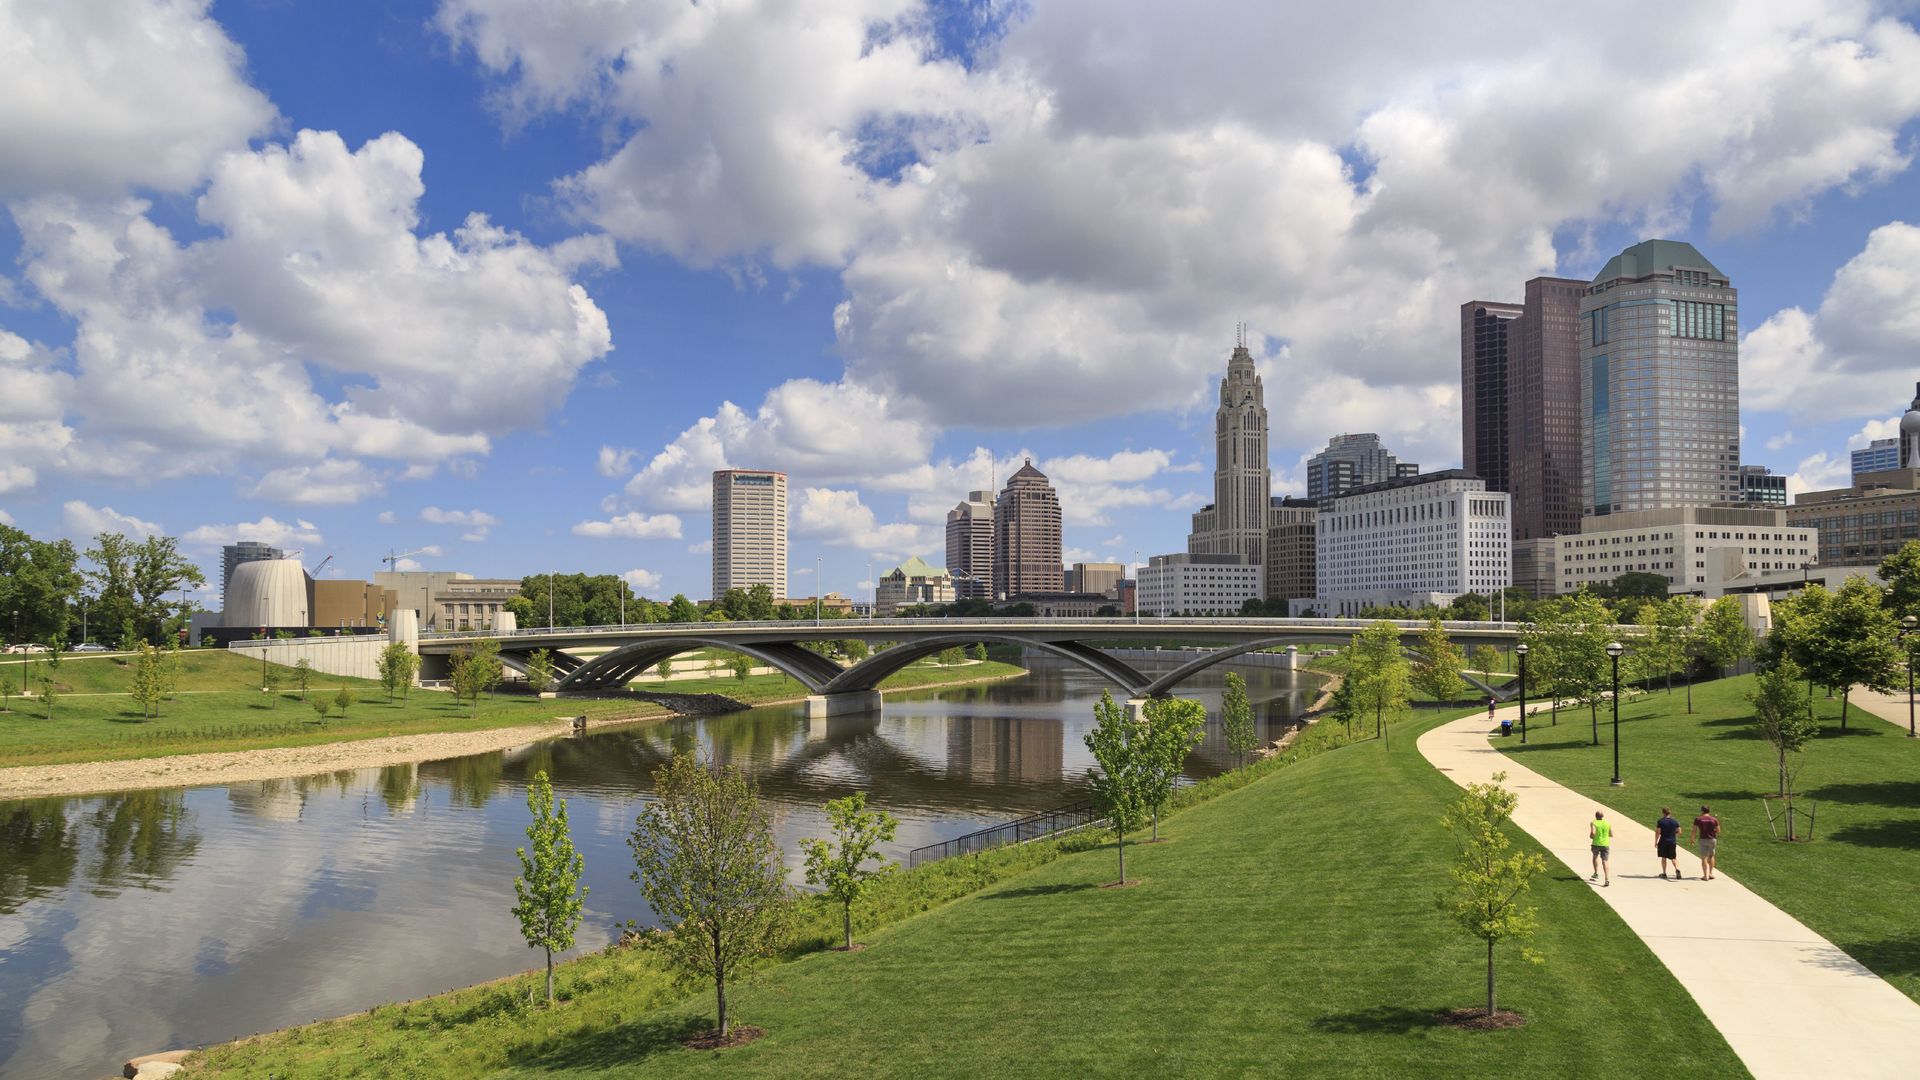 Columbus skyline in background among fluffy clouds, with Scioto Mile park greenspace and walking path in foreground